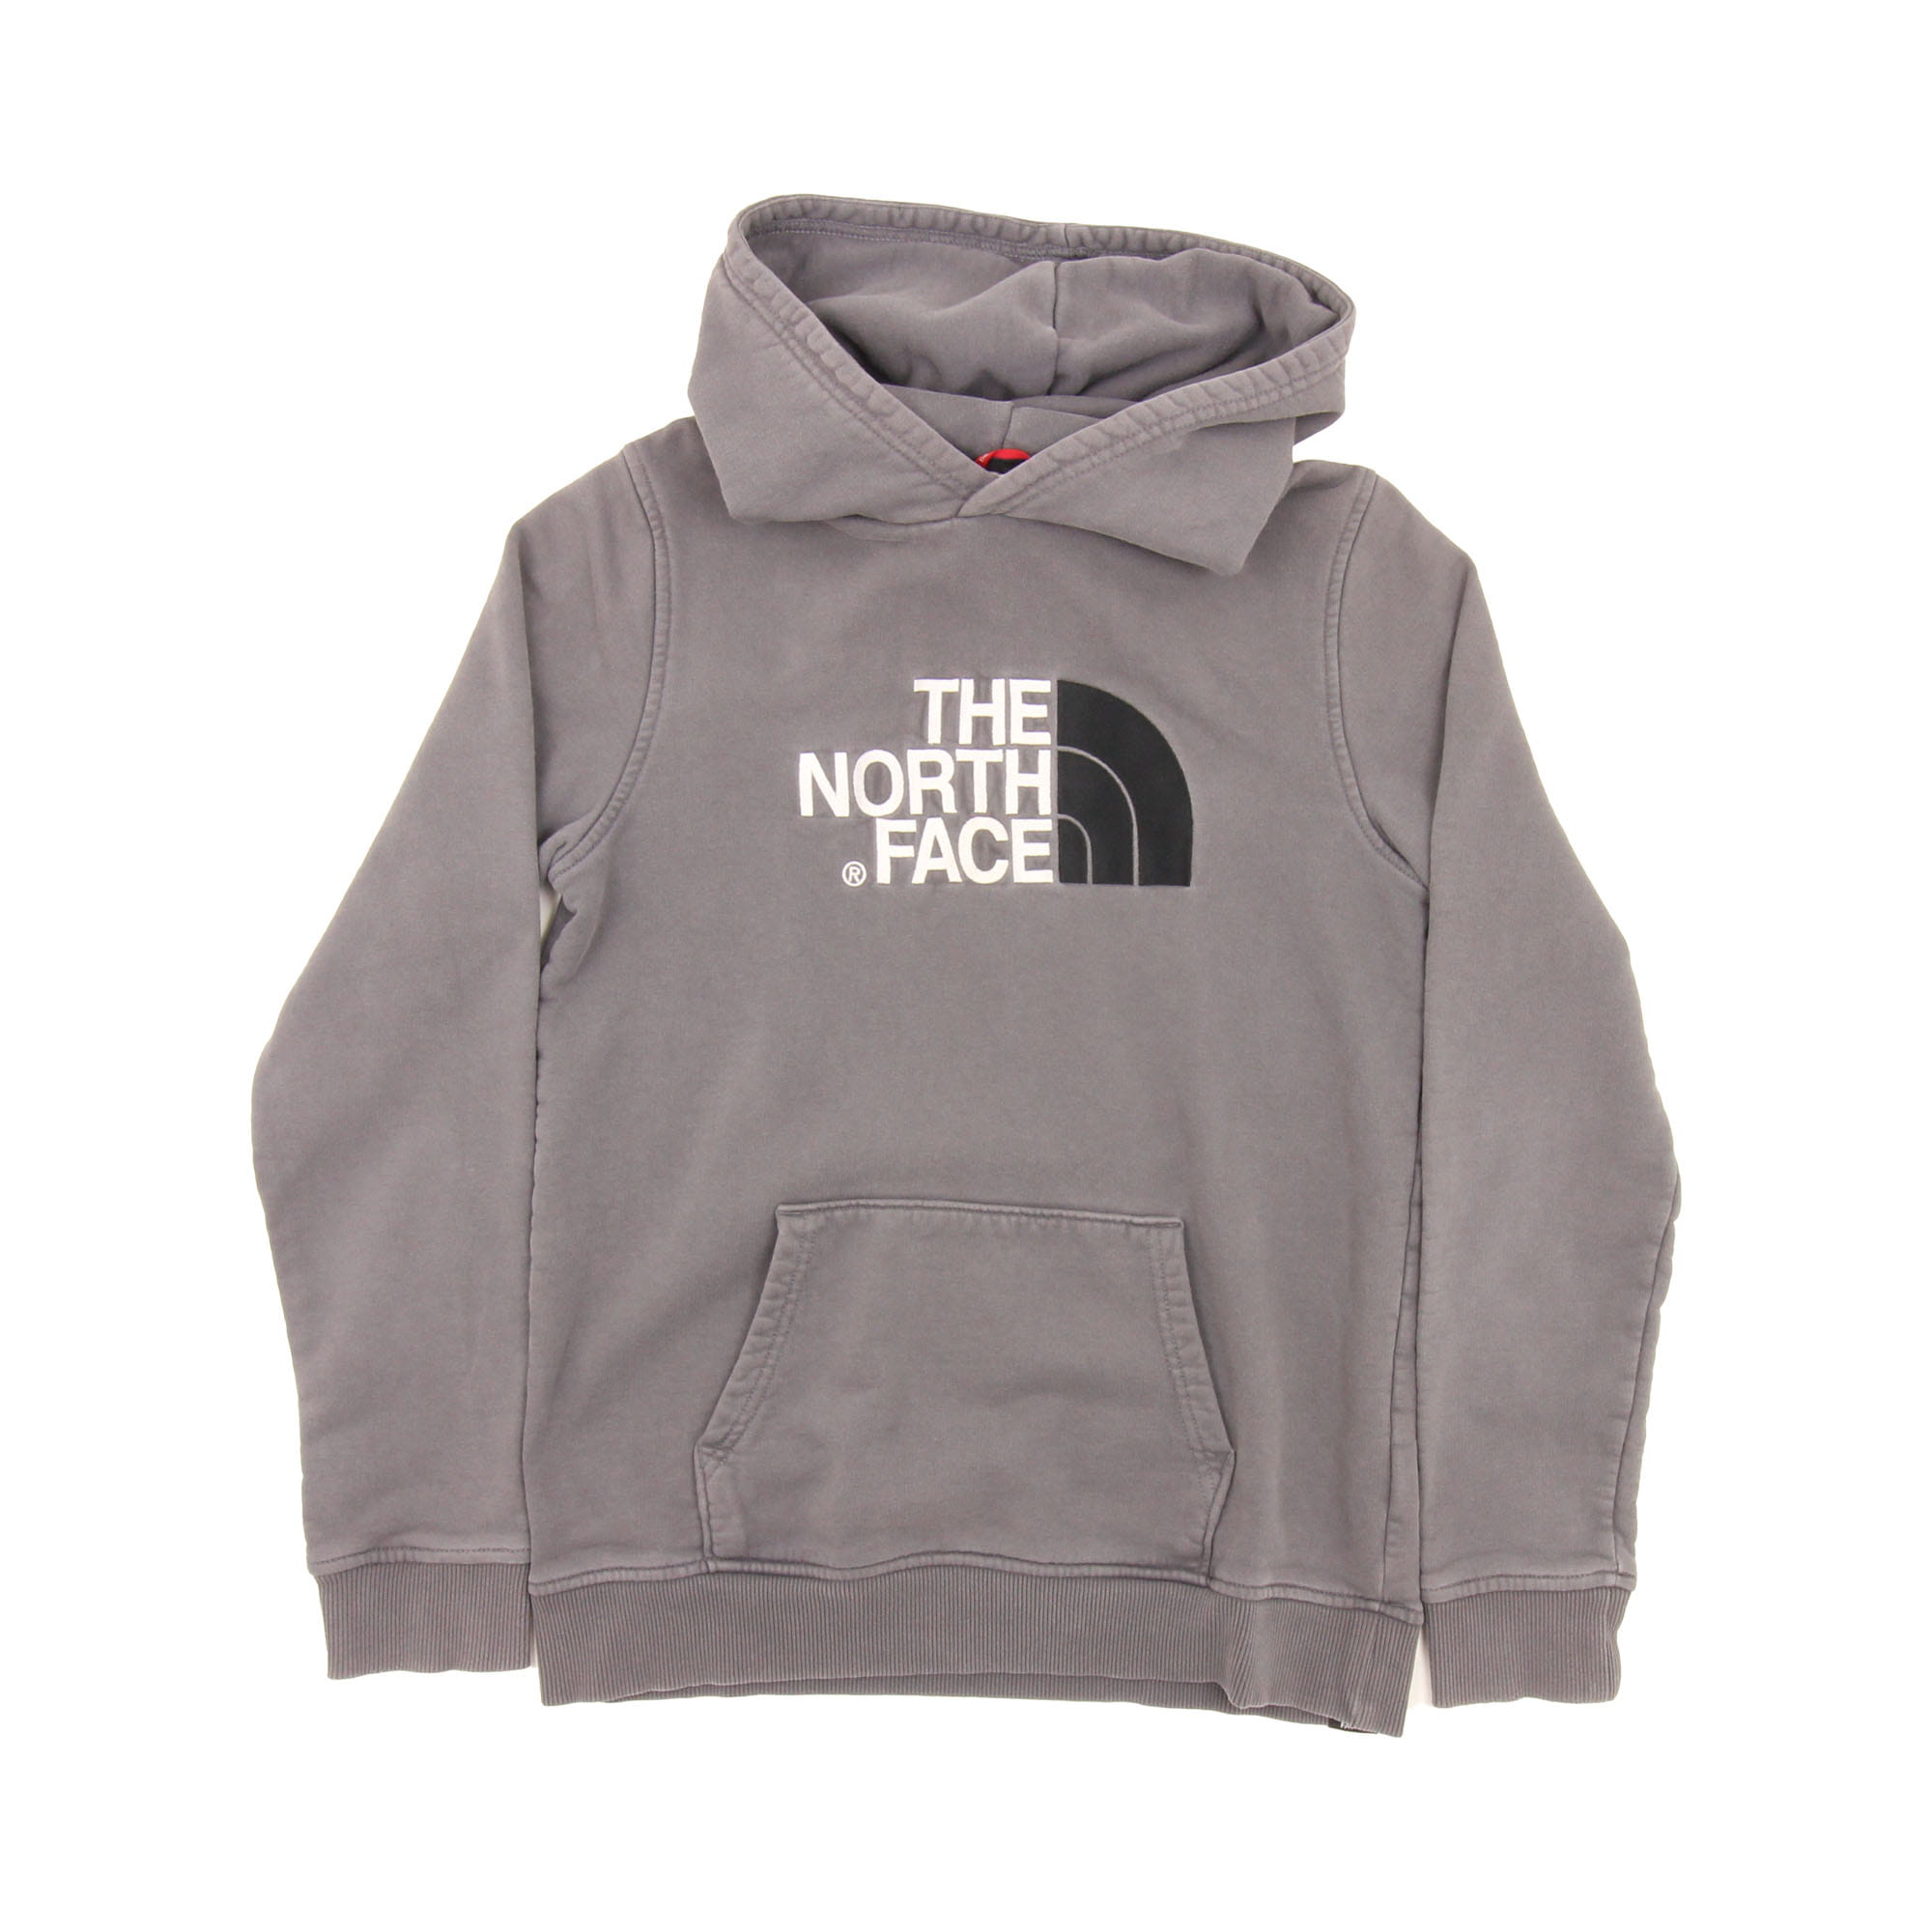 The North Face Hoodie Grey -  S